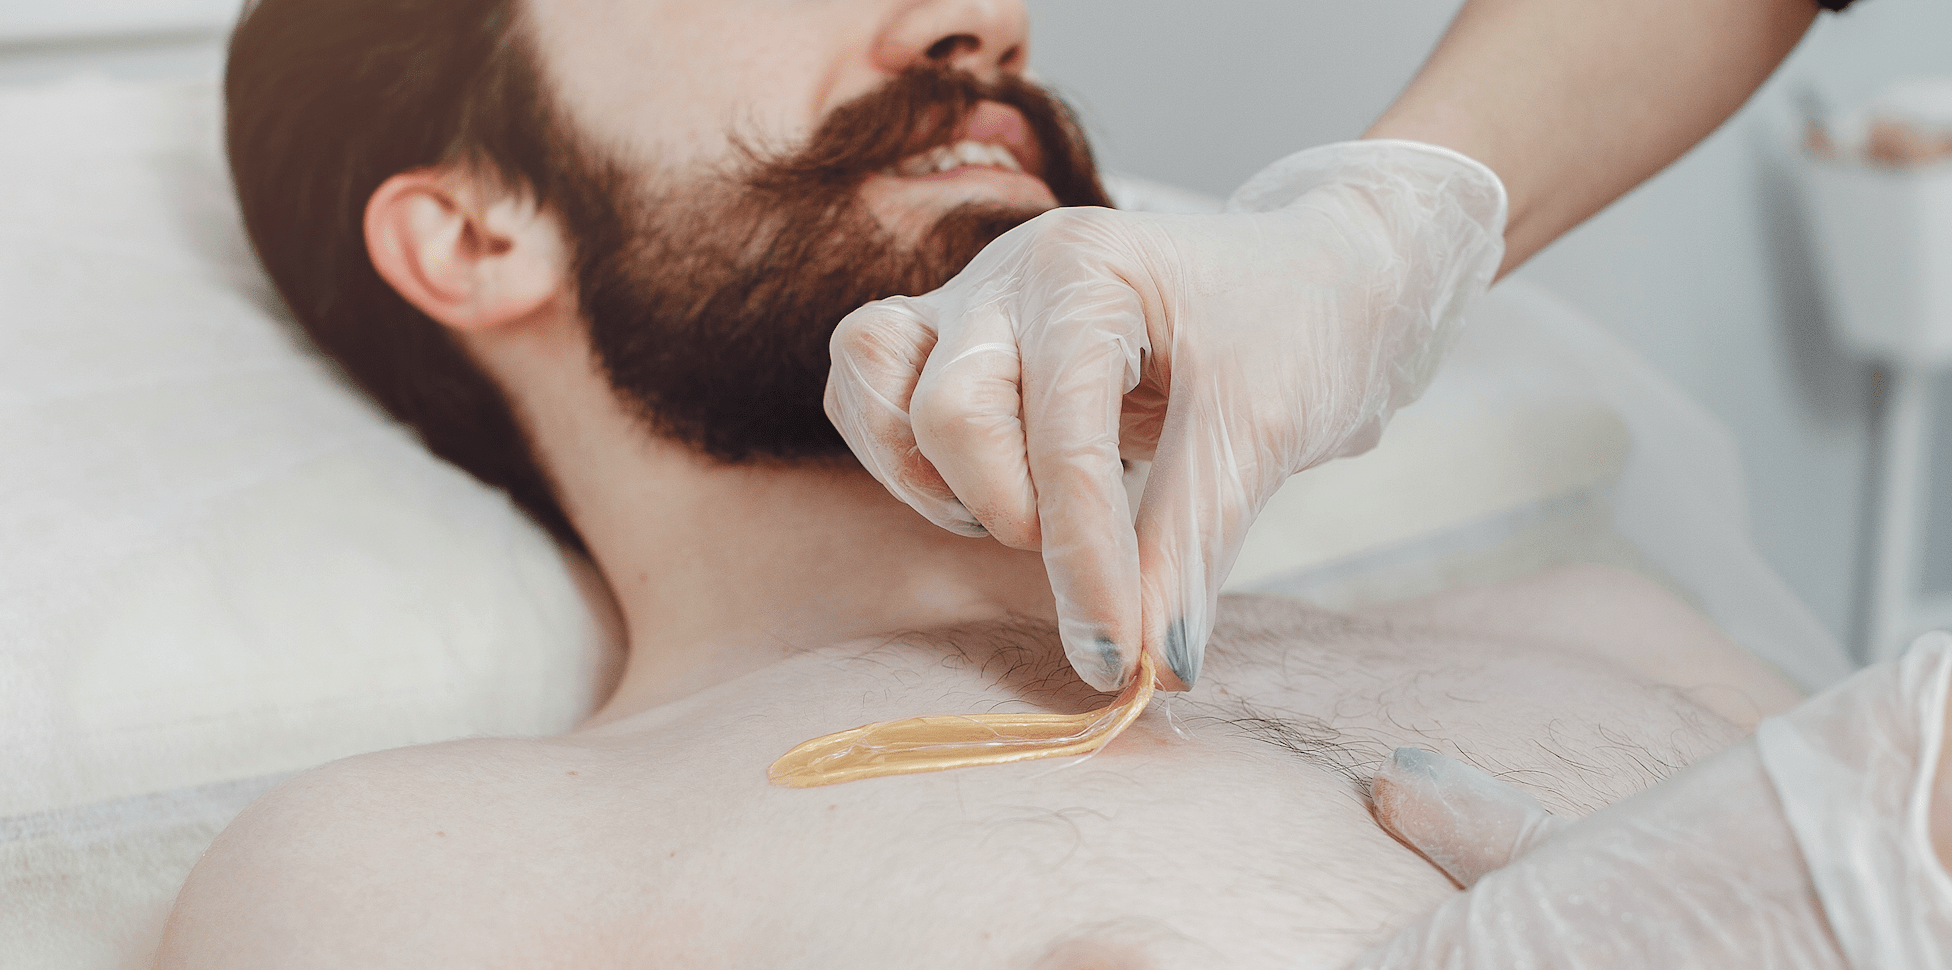 men's waxing services at home